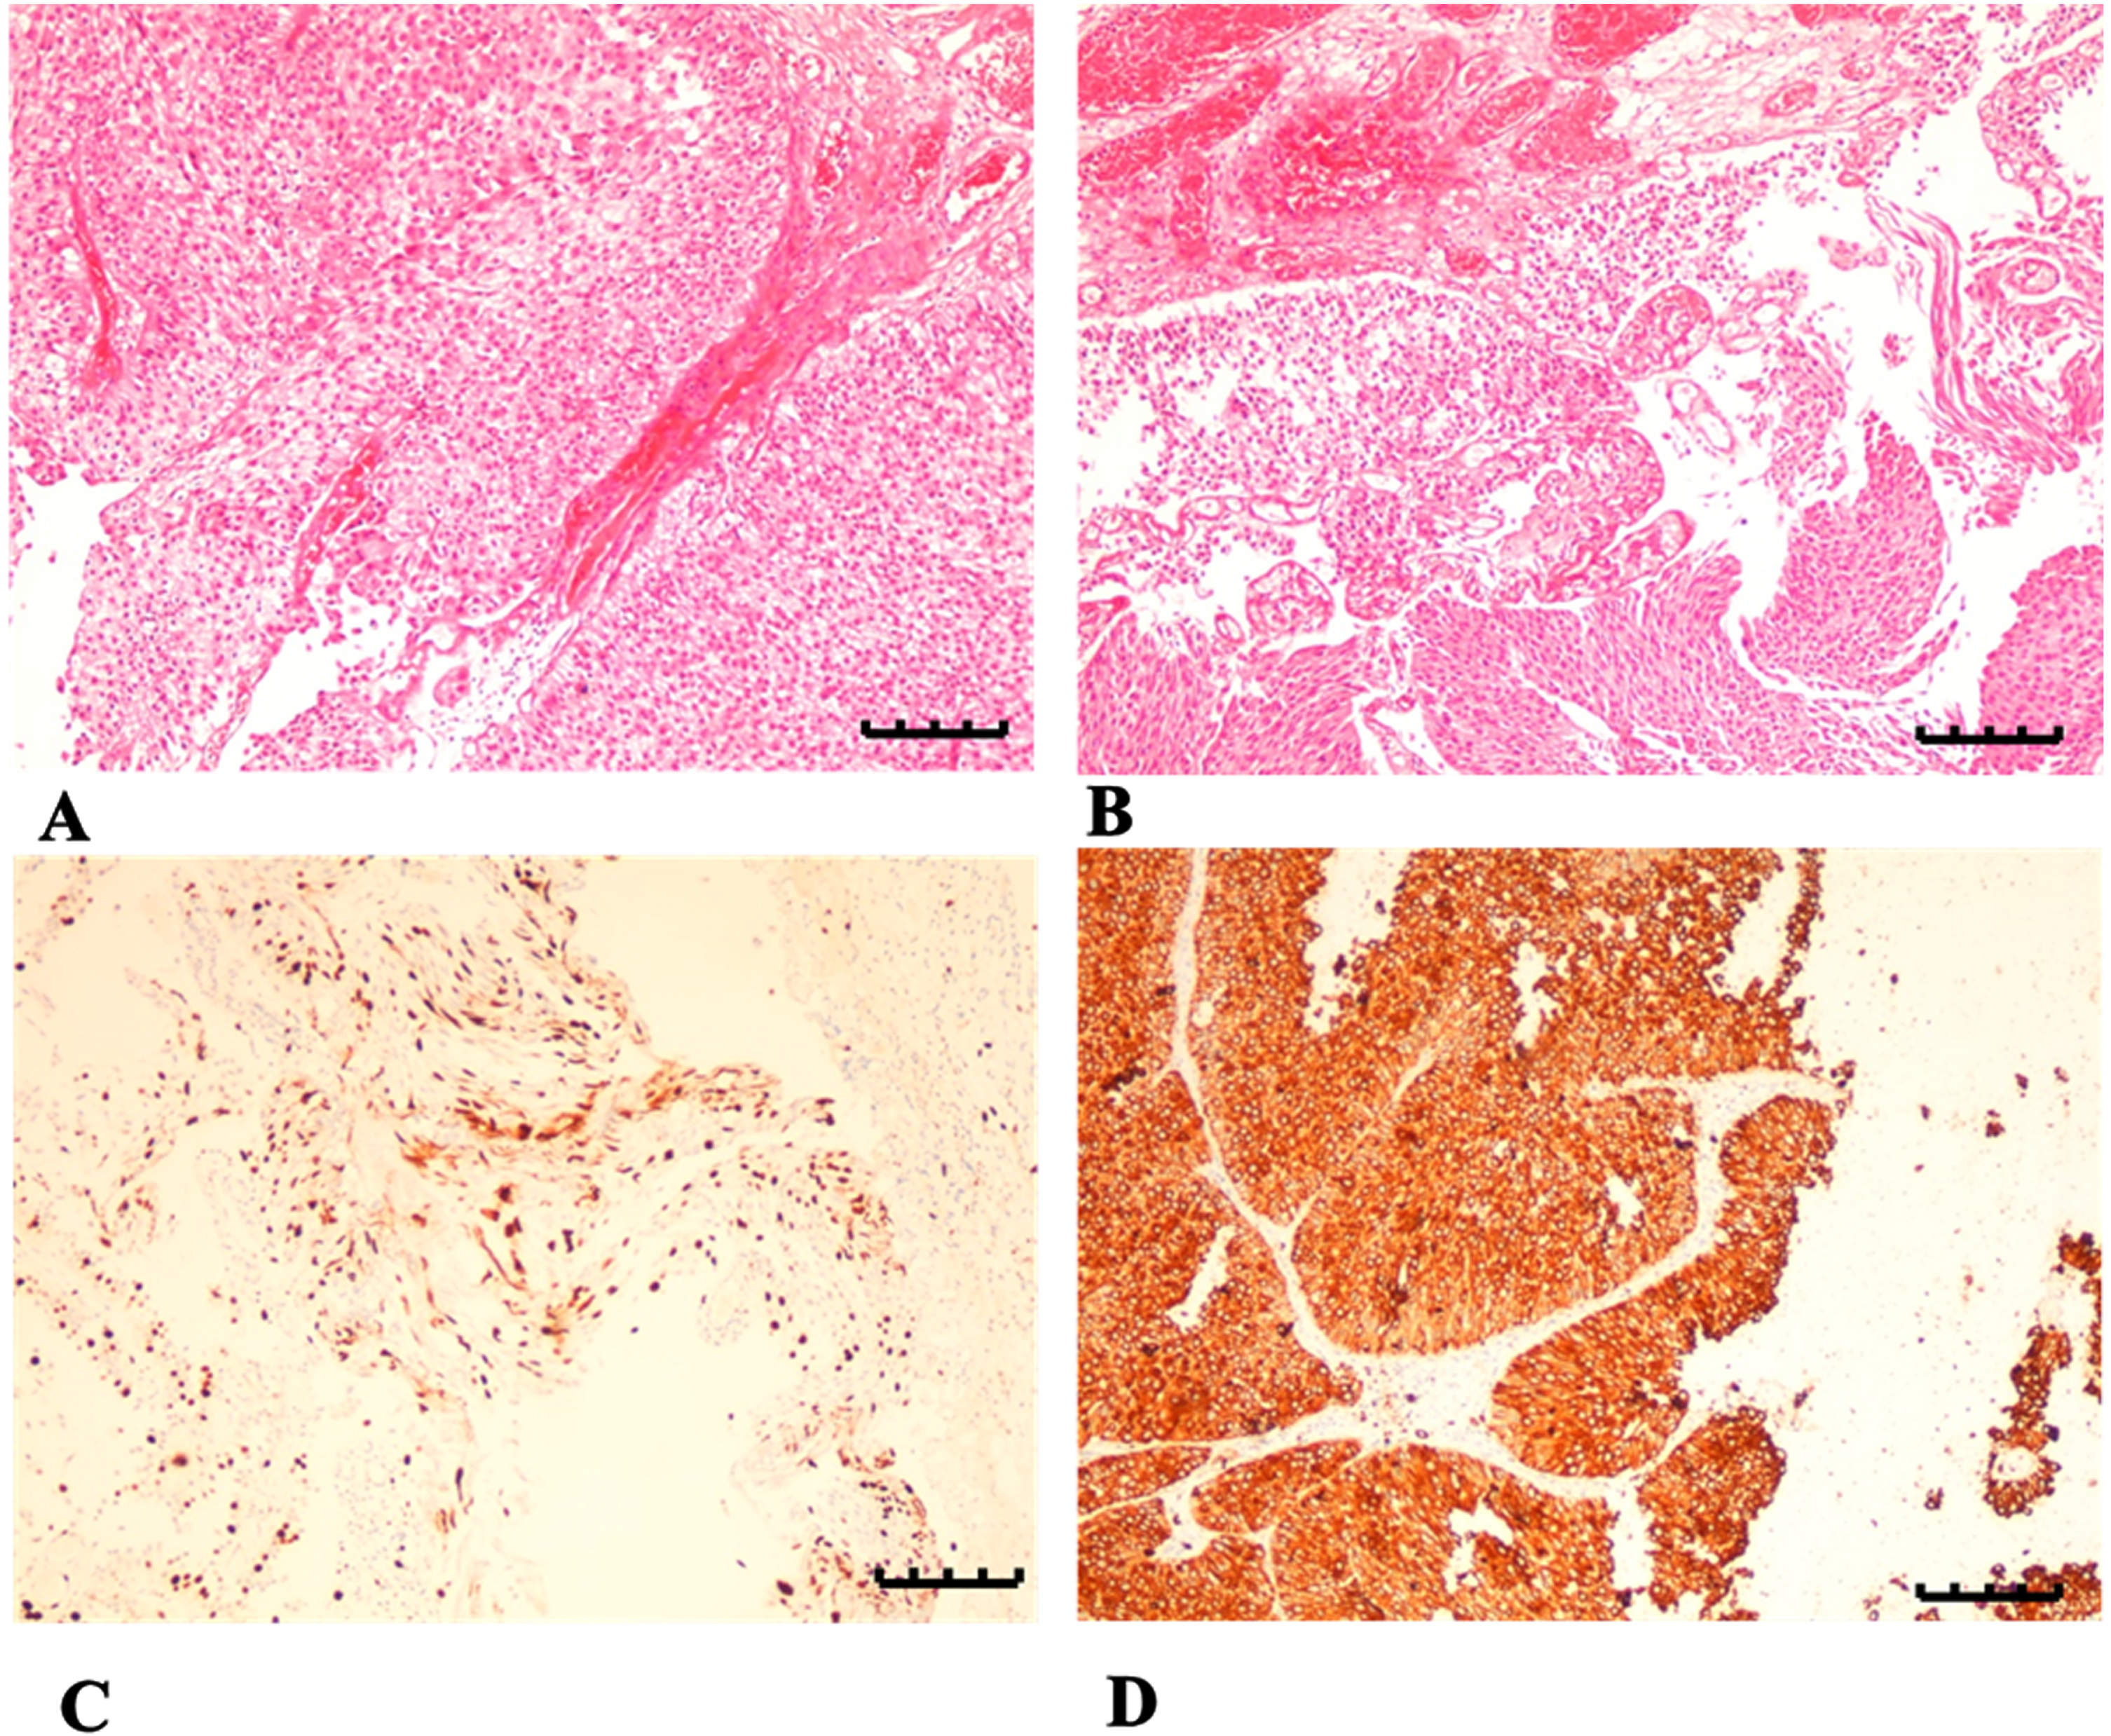 Microscopic histopathology provides images of cross sections of BC obtained from both Group 2 and Group 3 and analyzed under light microscopy, magnitude 100μm. H&E stain was added to A and B samples demonstrating imbalance in bladder cells, showing atypical sizes and forms for normal cells. Section A was obtained from Group 2; section B was obtained from Group 3, both demonstrating occasional textures of bladder tissues showing abnormal mitotic signs, decreased nucleoli, necrosis effects, presence of intracellular/extracellular elements and elevated level of RBCs with several overfilled veins. Sections C and D demonstrated immunity to stains by releasing PAF-R antibody. Section C was obtained from Group 2 demonstrating weak yet positive staining of PAF-R protein in non-smoking male participants with BC; meanwhile, Section D was obtained from Group 3 demonstrating strong and positive staining of PAF-R protein in male smokers with BC.